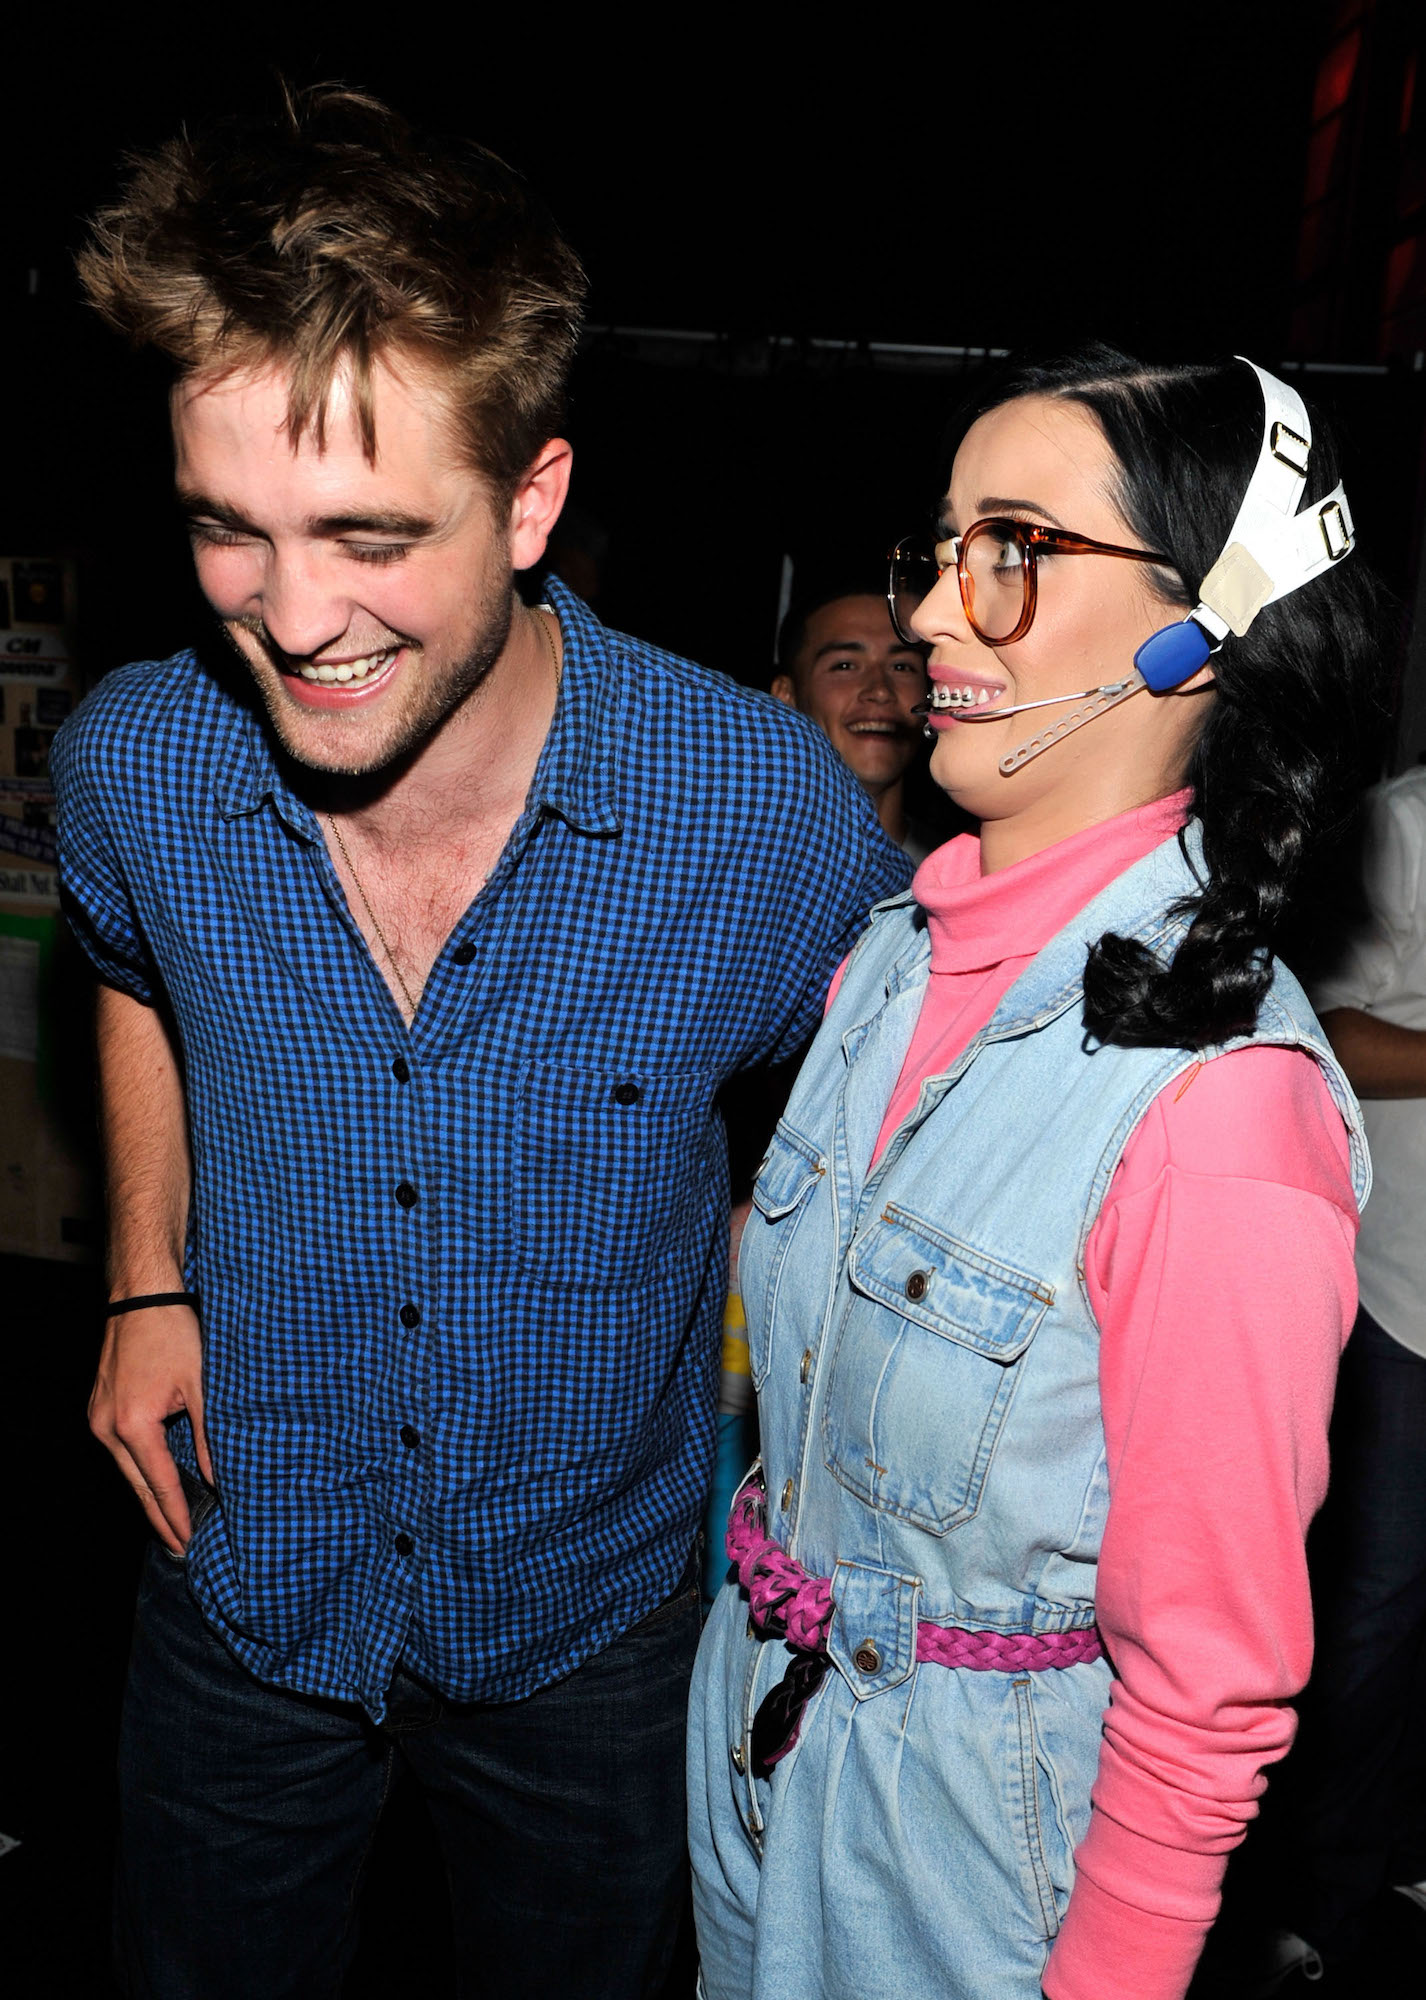 Robert Pattinson and host Katy Perry at the 2010 Teen Choice Awards on Aug. 8, 2010.